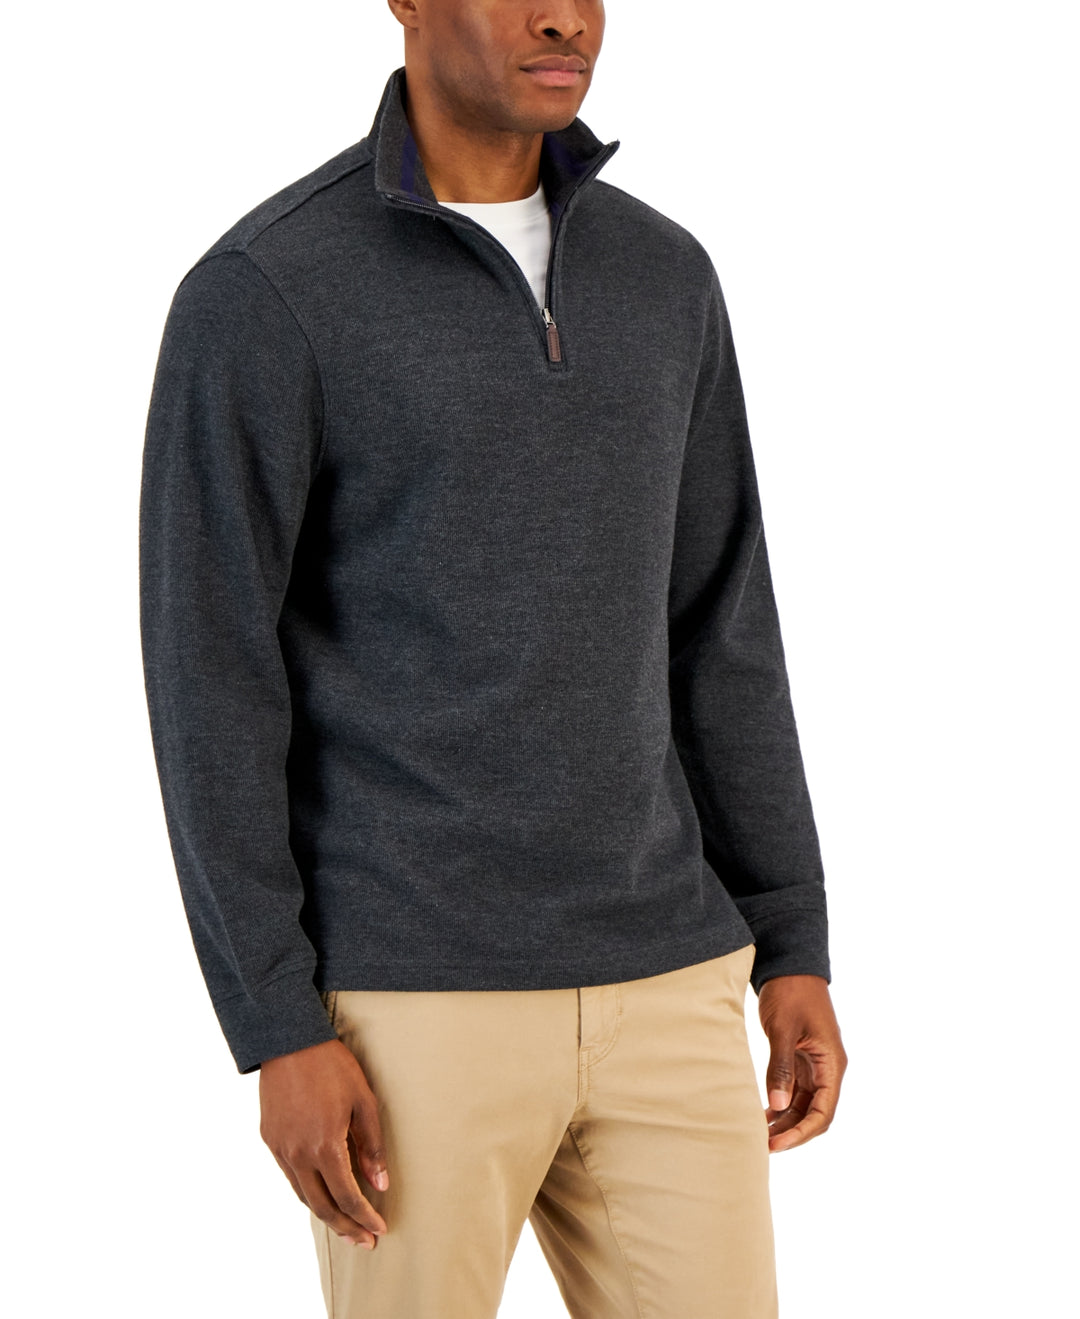 Club Room Men's Solid Classic Fit French Rib Quarter Zip Sweater Gray Size X-Large